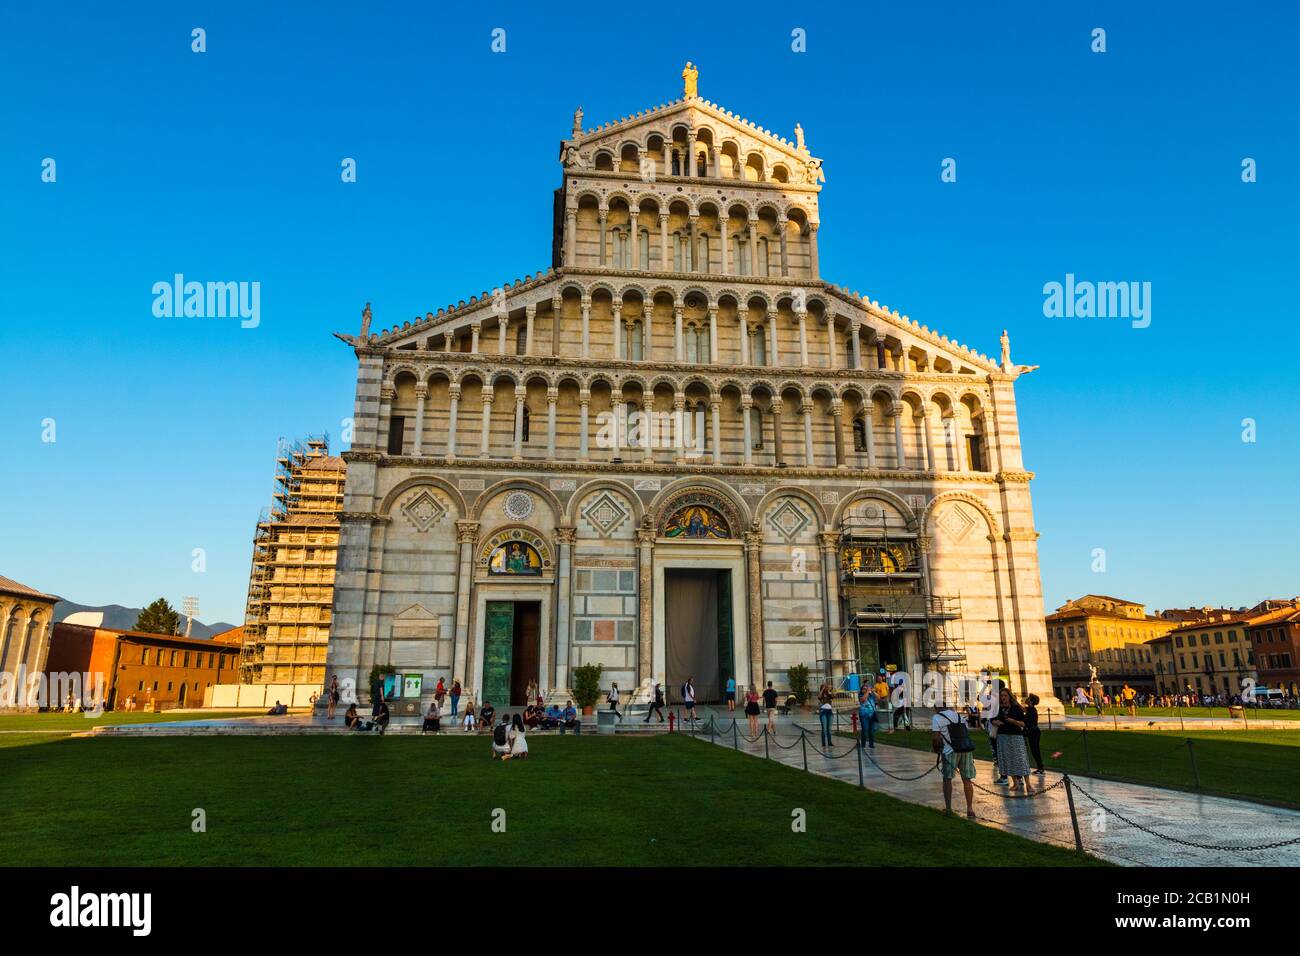 Nice front view of the medieval Pisa Cathedral façade. Above the doors are four rows of open galleries with, on top, statues of Madonna with Child and... Stock Photo